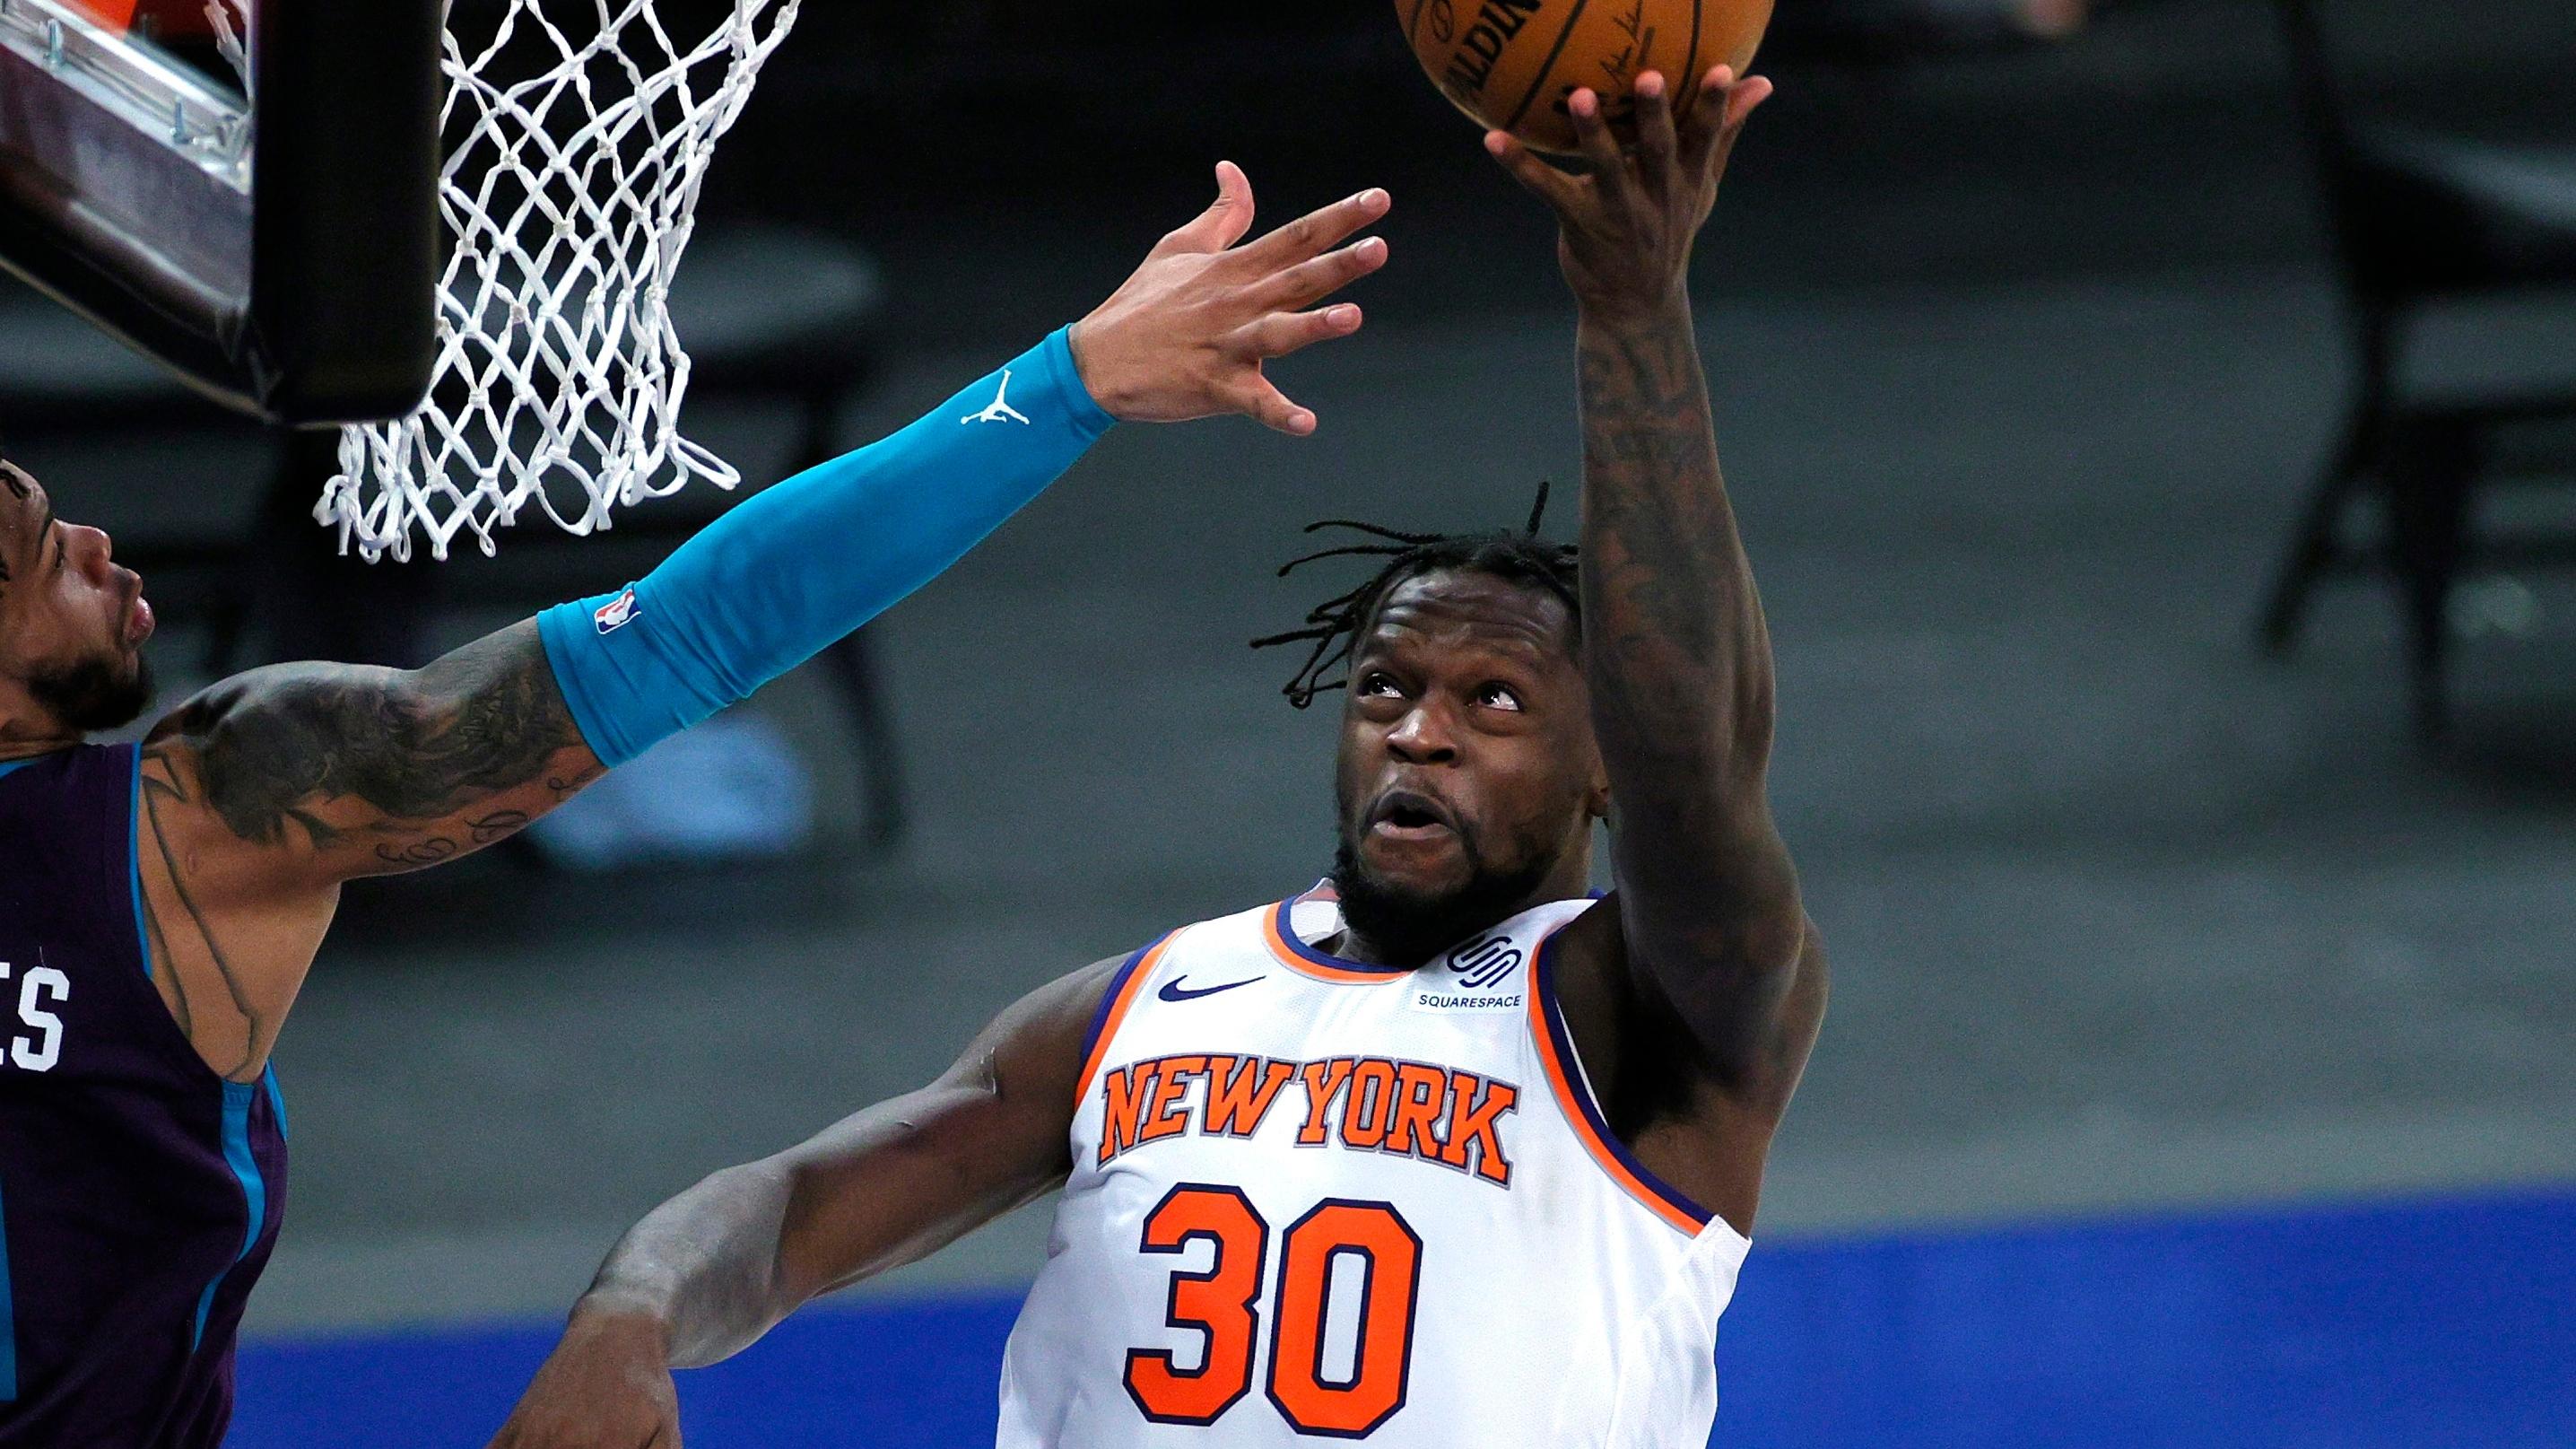 Apr 20, 2021; New York, New York, USA; Julius Randle #30 of the New York Knicks goes to the basket as Miles Bridges #0 of the Charlotte Hornets defends during the second half at Madison Square Garden. / Sarah Stier/POOL PHOTOS-USA TODAY Sports